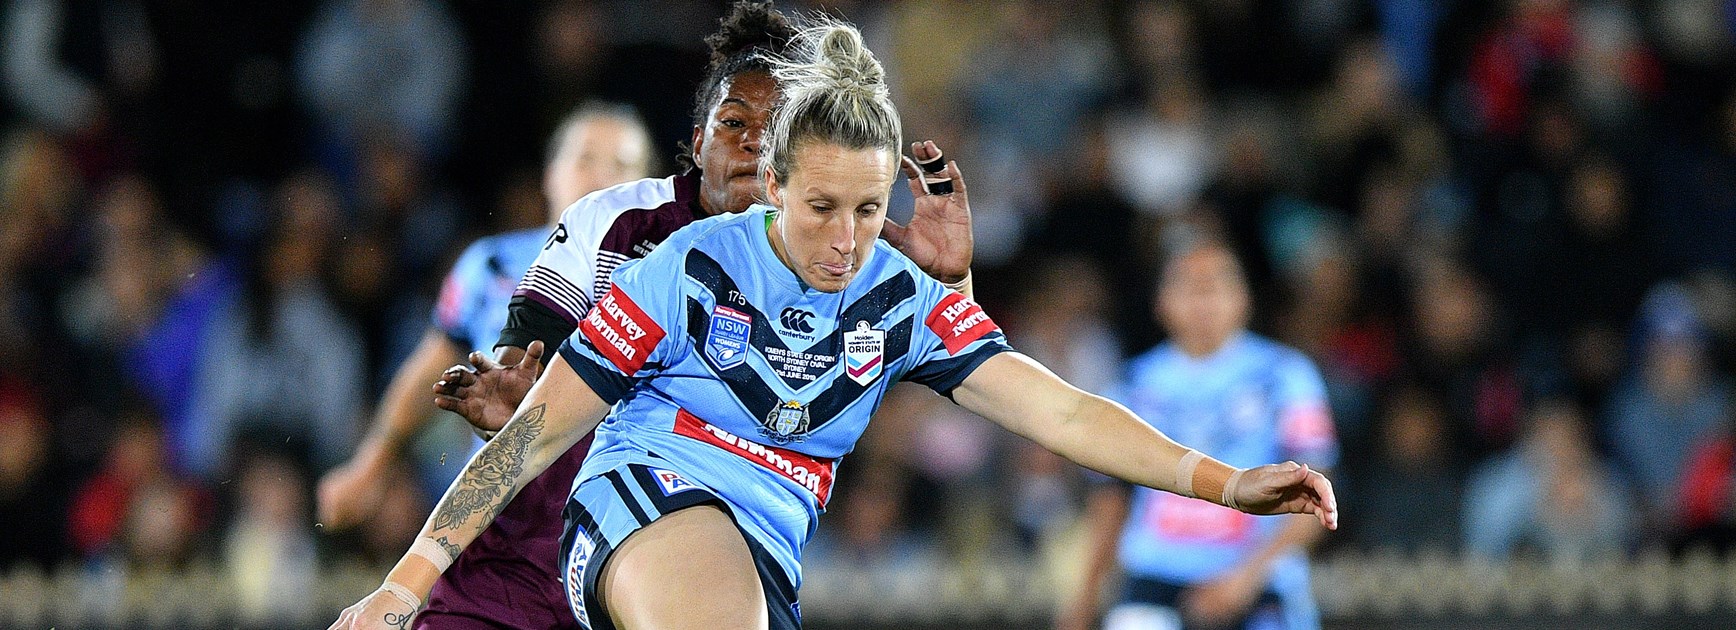 Holli Wheeler shows off her kicking skills for NSW against Queensland in 2019.